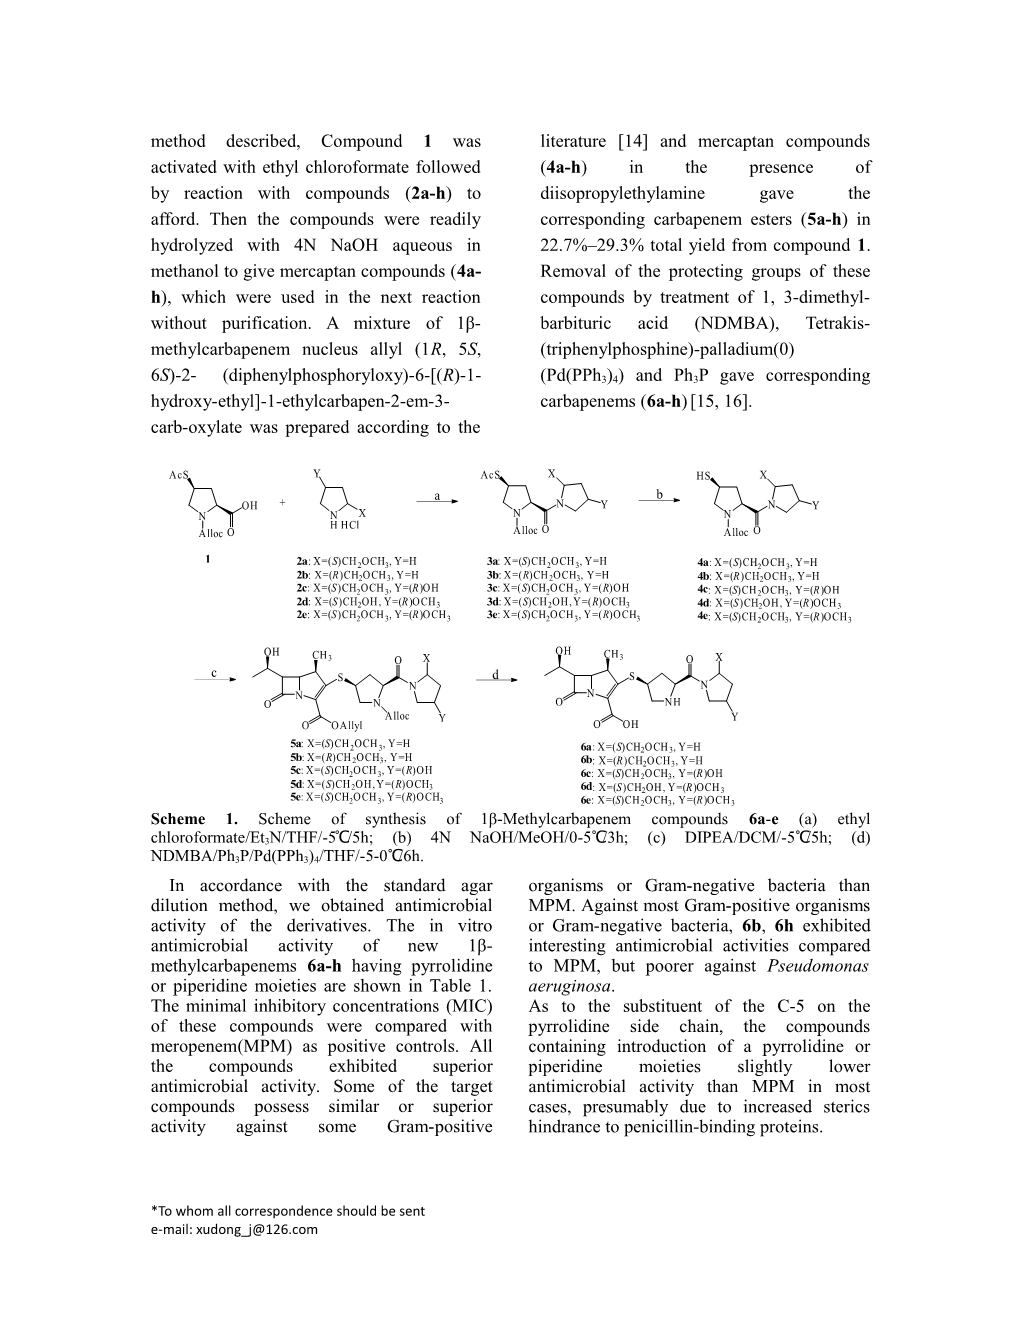 Synthesis and Antimicrobial Activity of Some New 1Β-Methylcarbapenem Derivatives Having